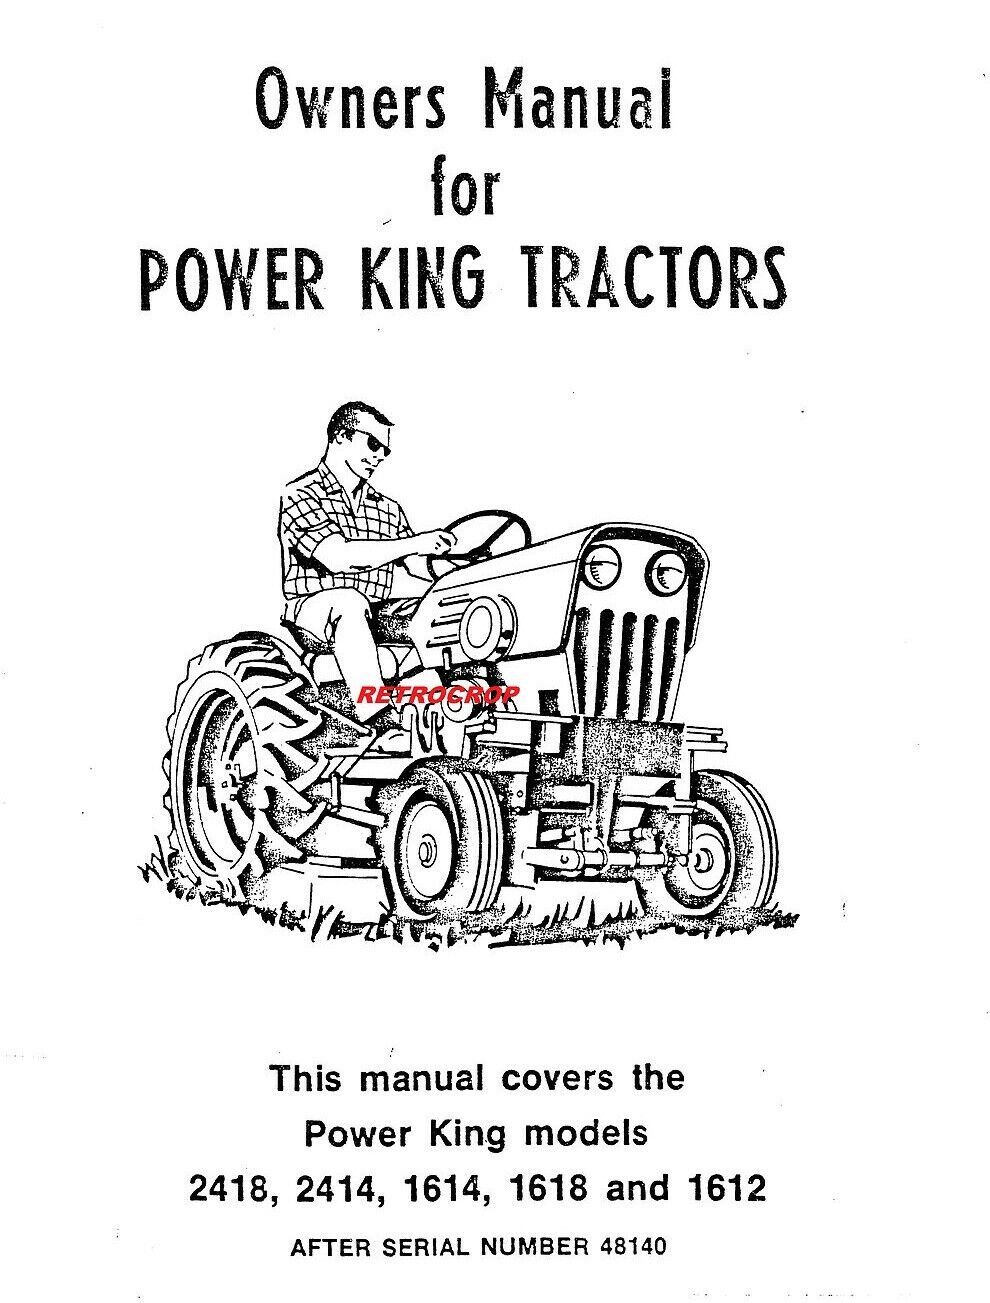 Economy Power King Tractor Operator Owner\'s Manual 2418 2414 1618 1612 98-7104